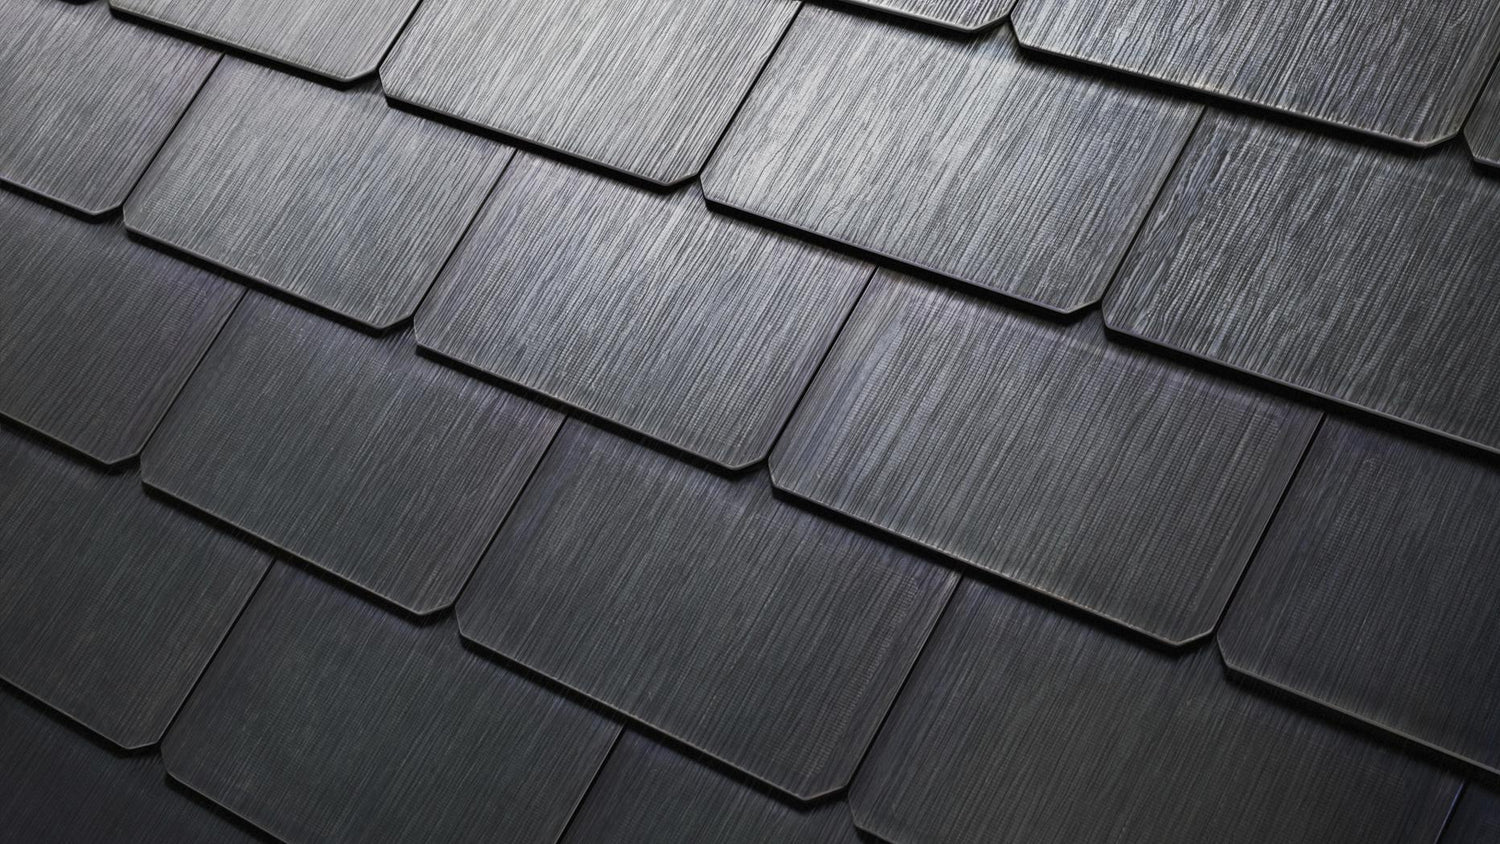 Tesla filed a new patent 'Solar roof tile with a uniform appearance'